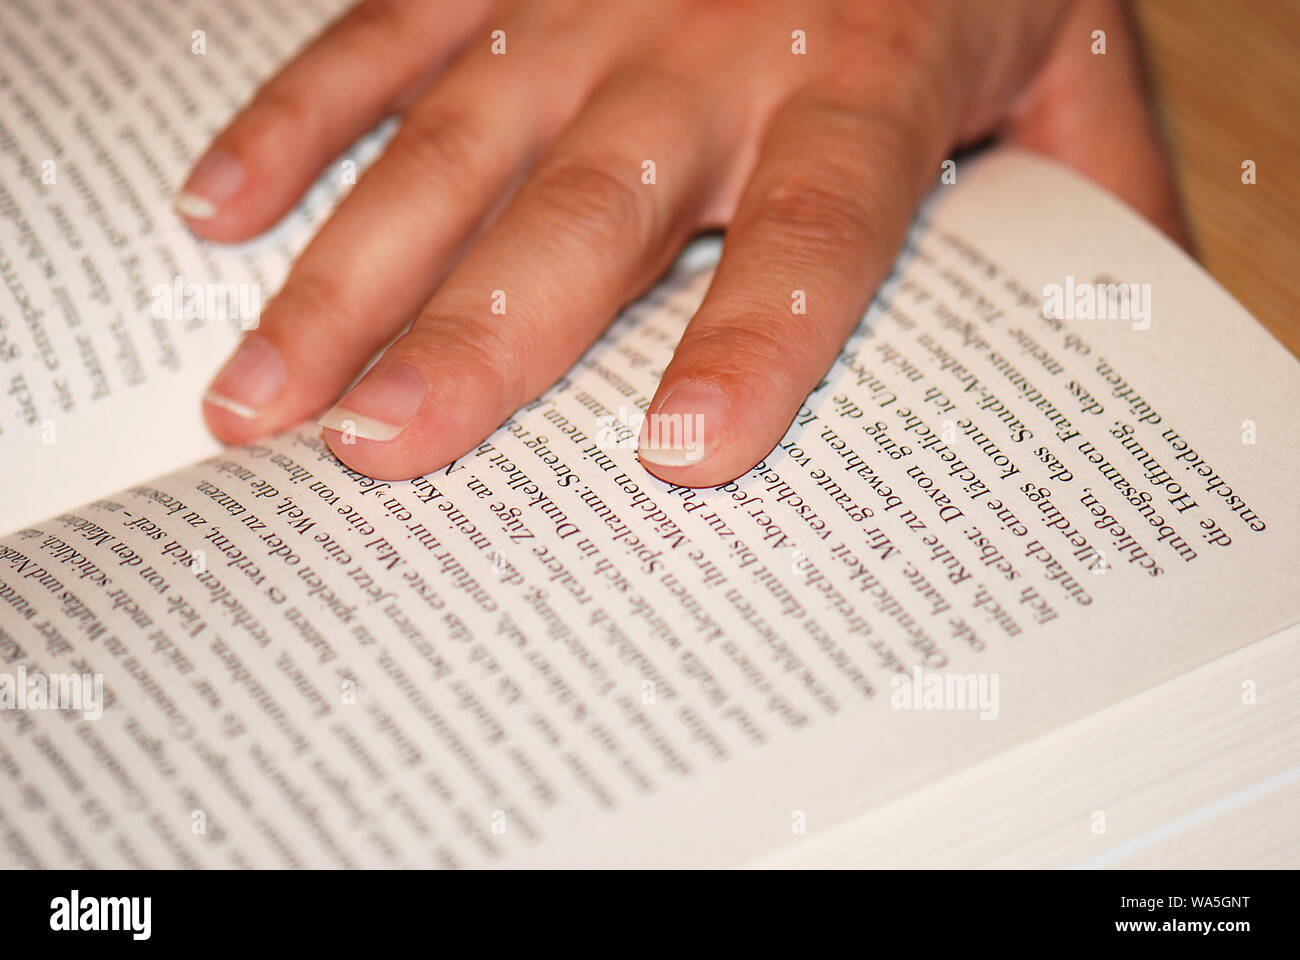 female reading a book Stock Photo